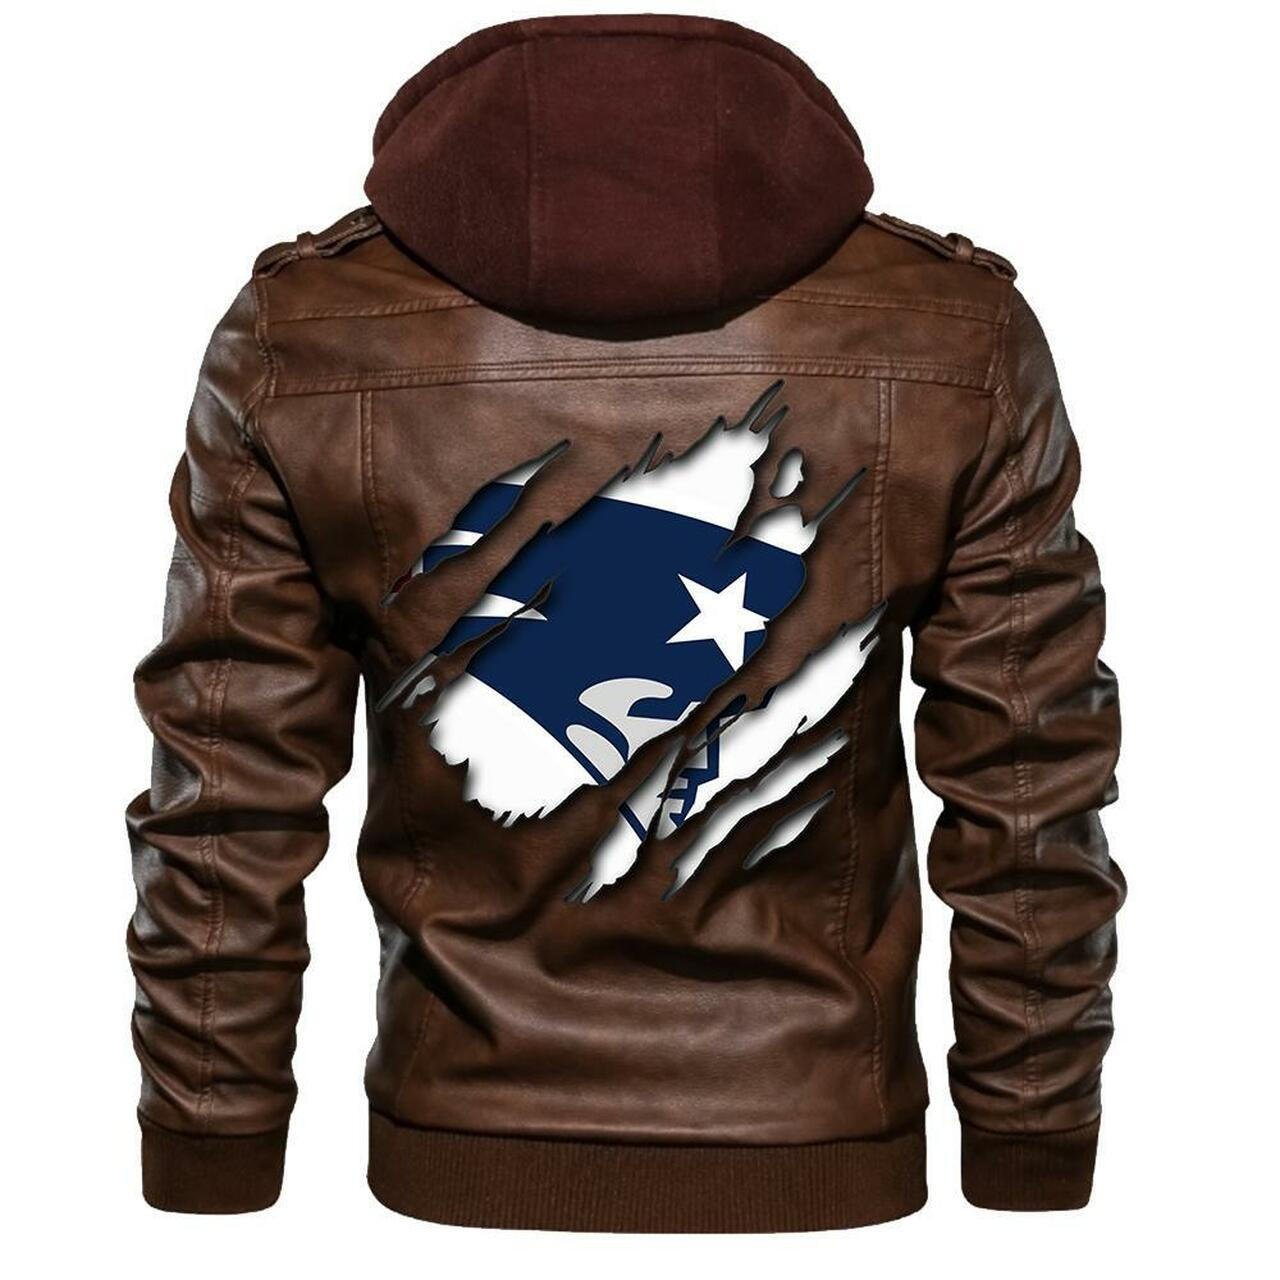 Top leather jackets are the perfect choice for the active man. 459